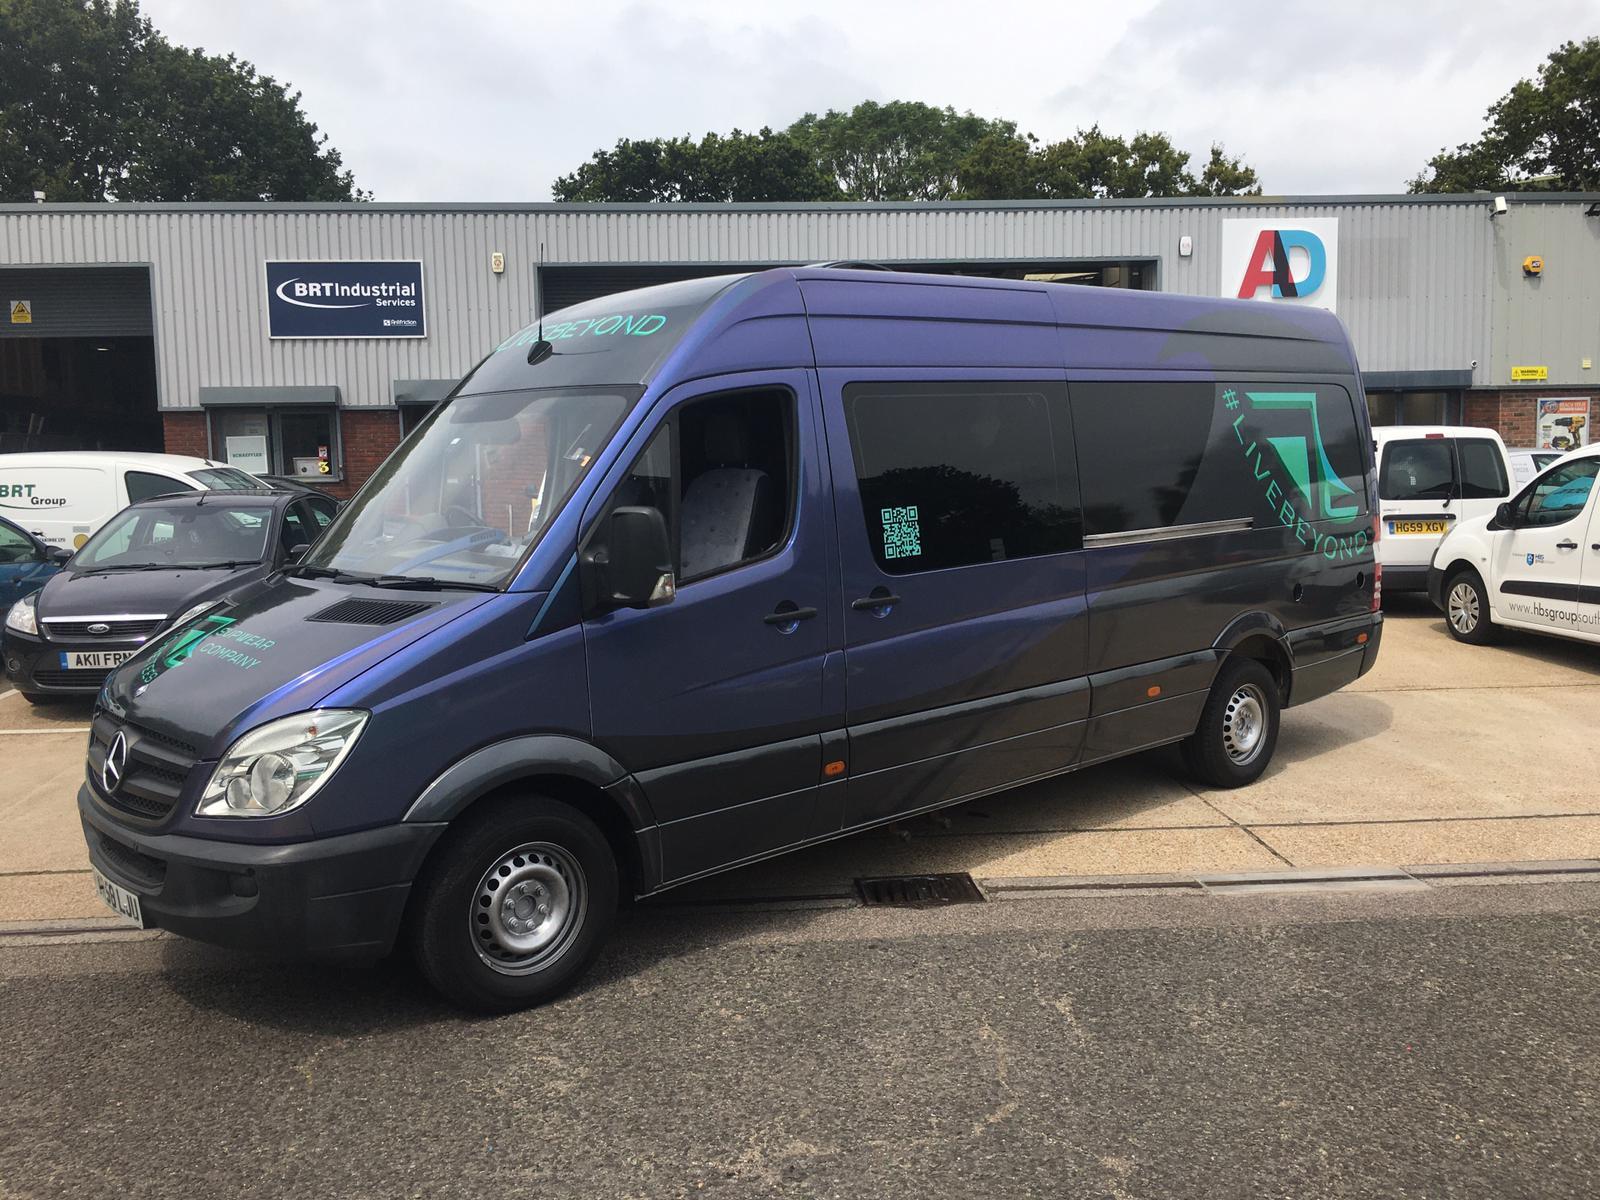 Mercedes Sprinter Camper - Full wrap complete with branding